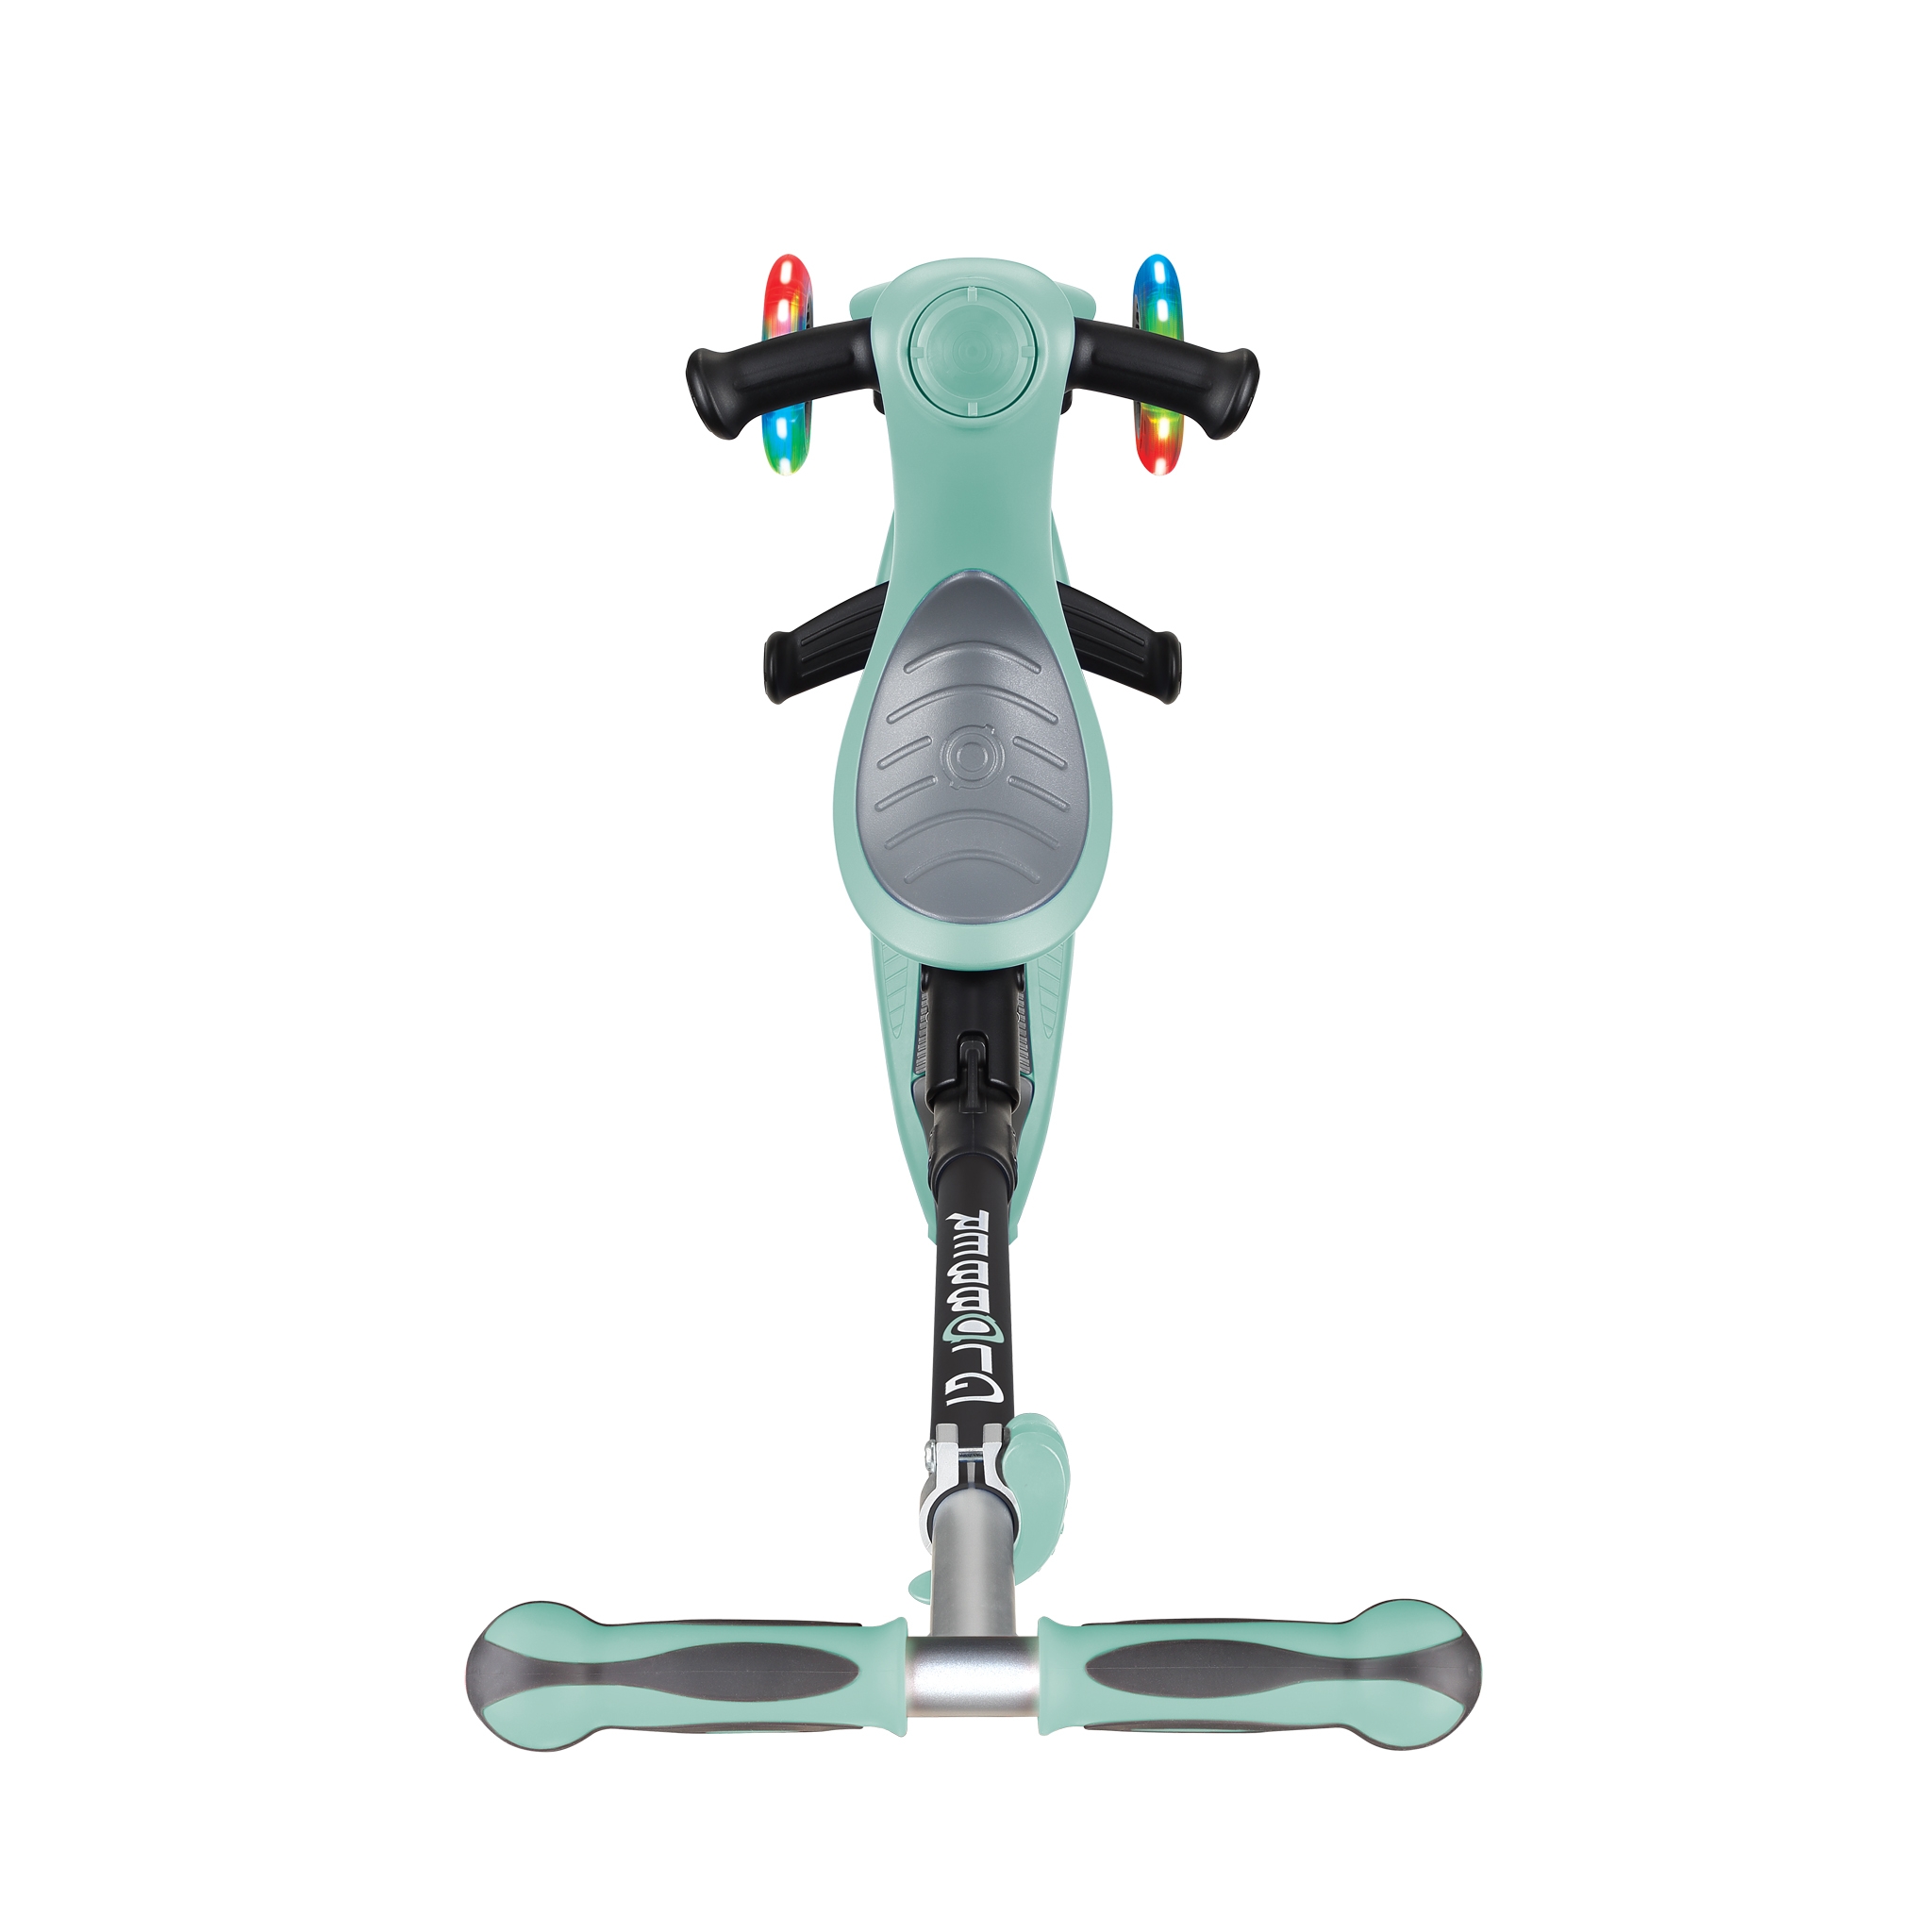 GO-UP-DELUXE-LIGHTS-ride-on-walking-bike-scooter-with-light-up-wheels-and-extra-wide-3-height-adjustable-seat-mint 2